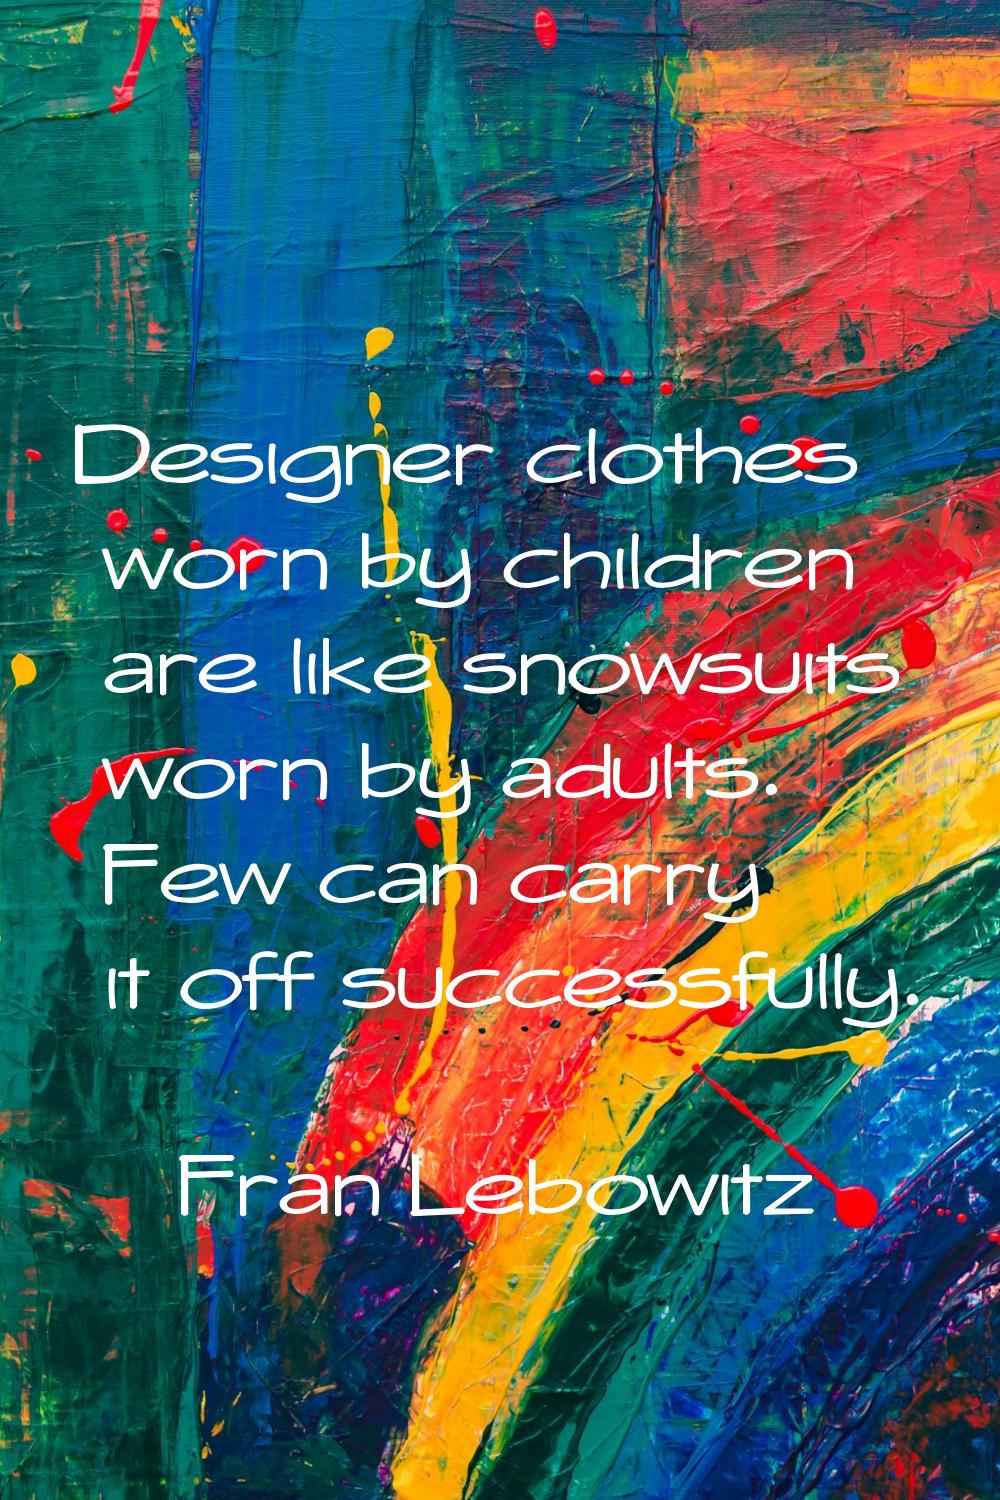 Designer clothes worn by children are like snowsuits worn by adults. Few can carry it off successfu